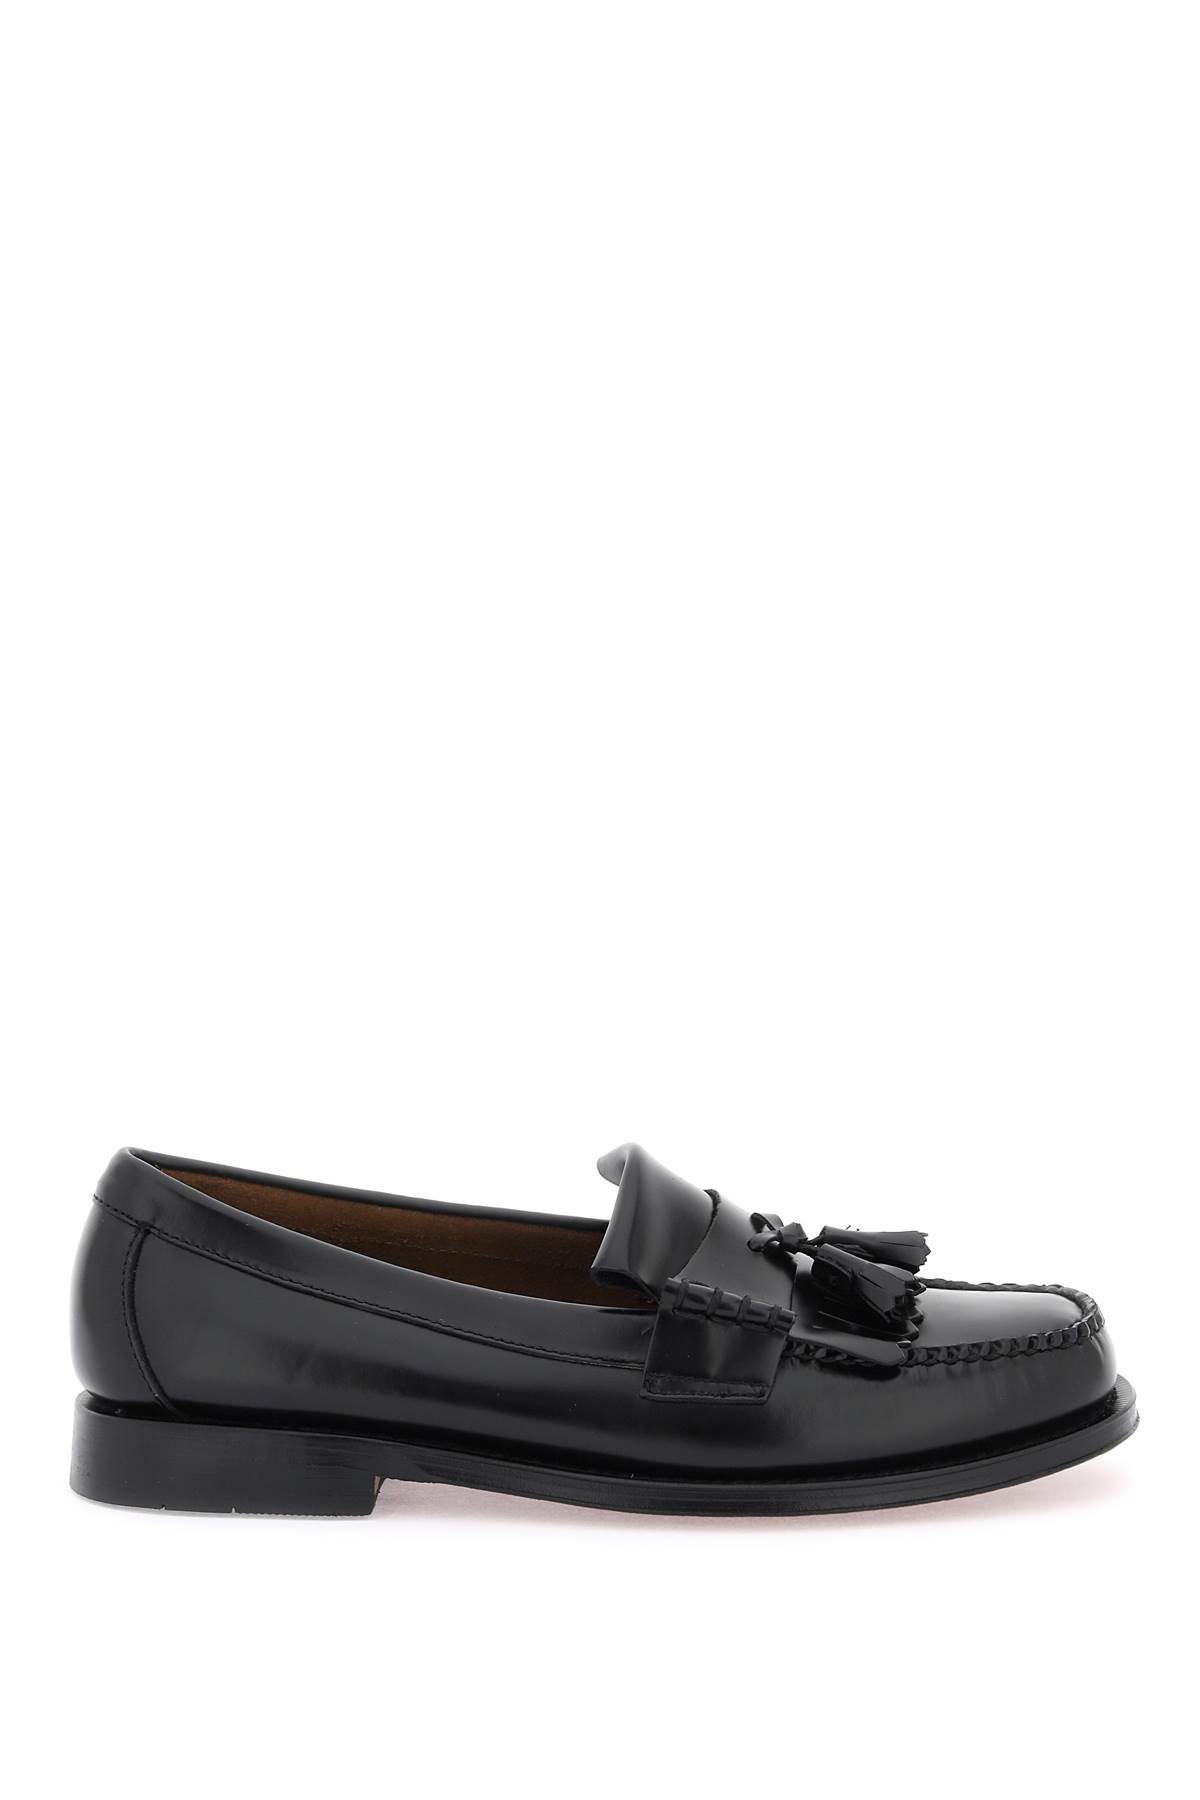 G.H.Bass & Co. Esther Kiltie Weejuns Loafers In Brushed Leather